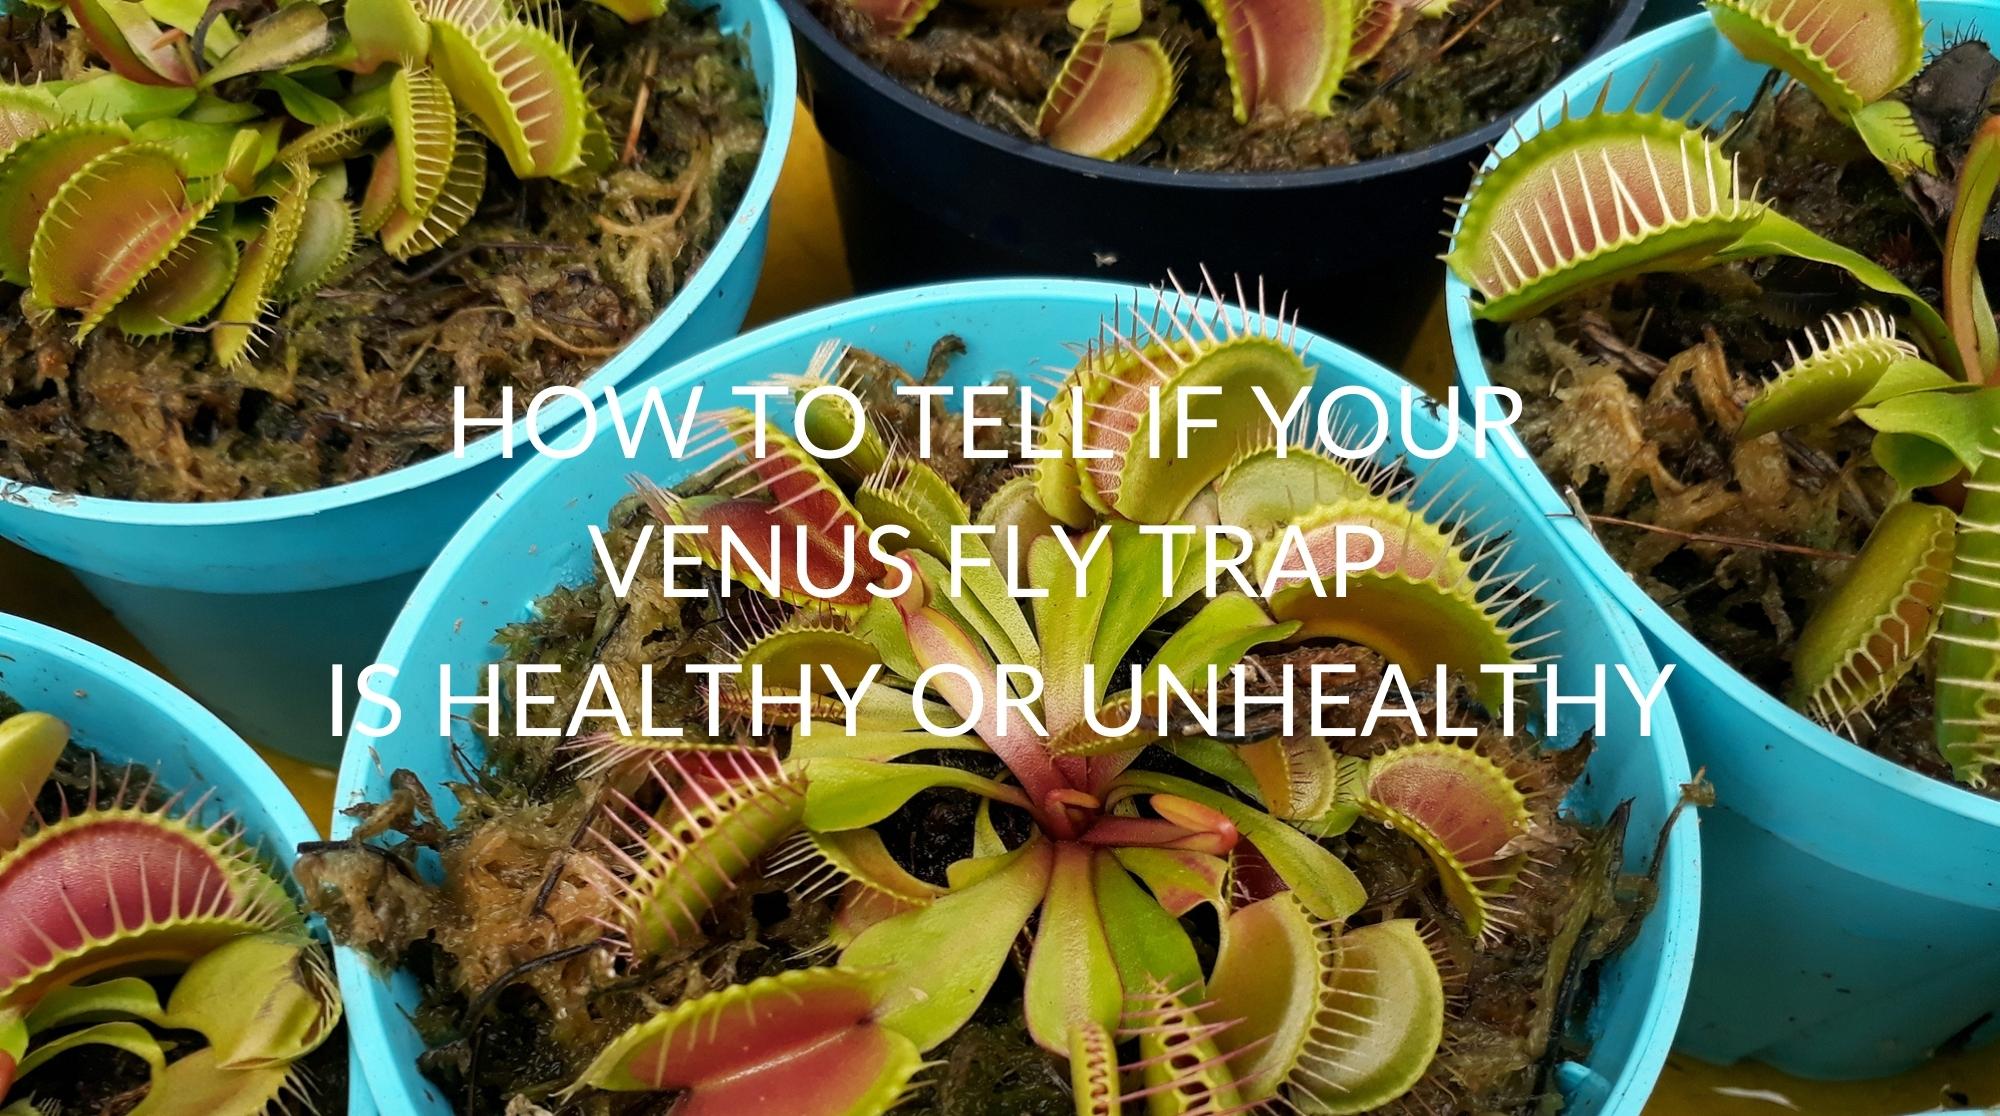 12 Reasons Why is Unhealthy Venus Fly trap (with solutions)